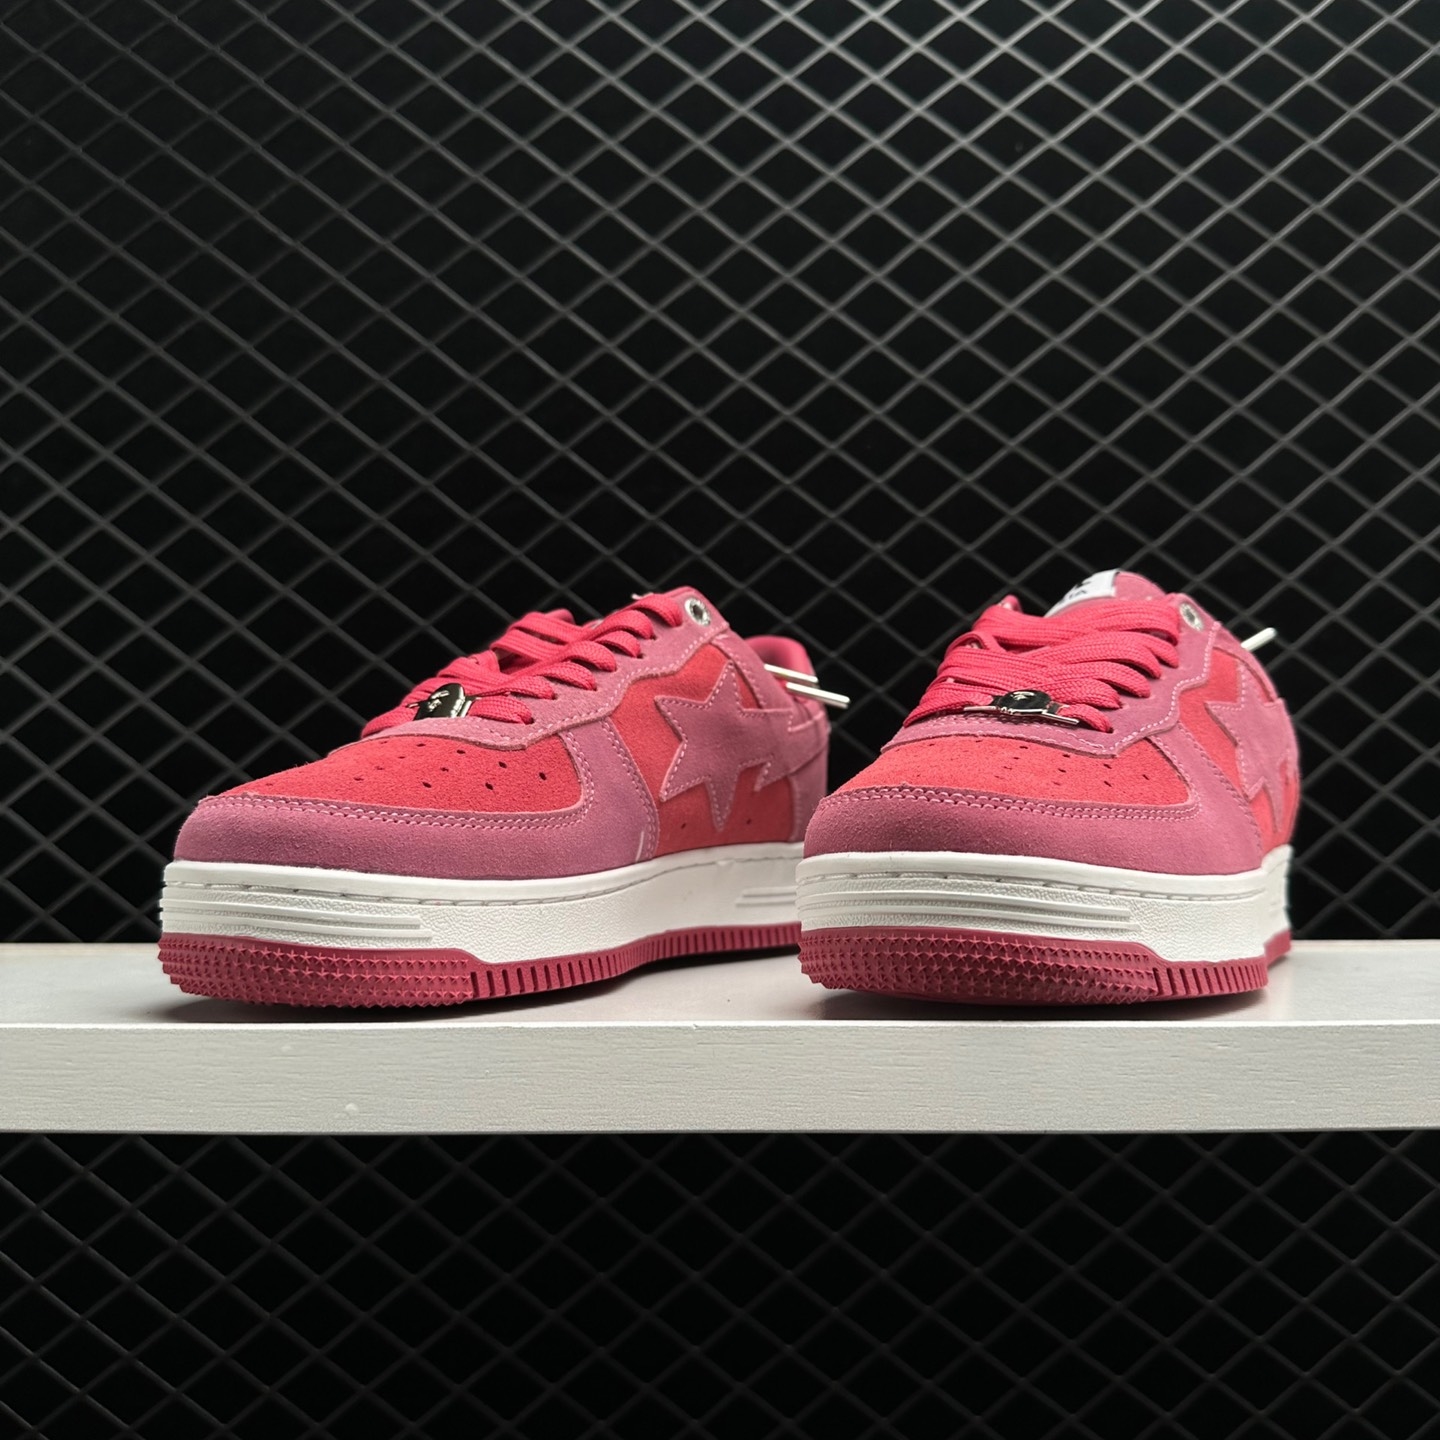 A Bathing Ape Bape Sta Pink Suede - Striking Sneakers for Street Style.